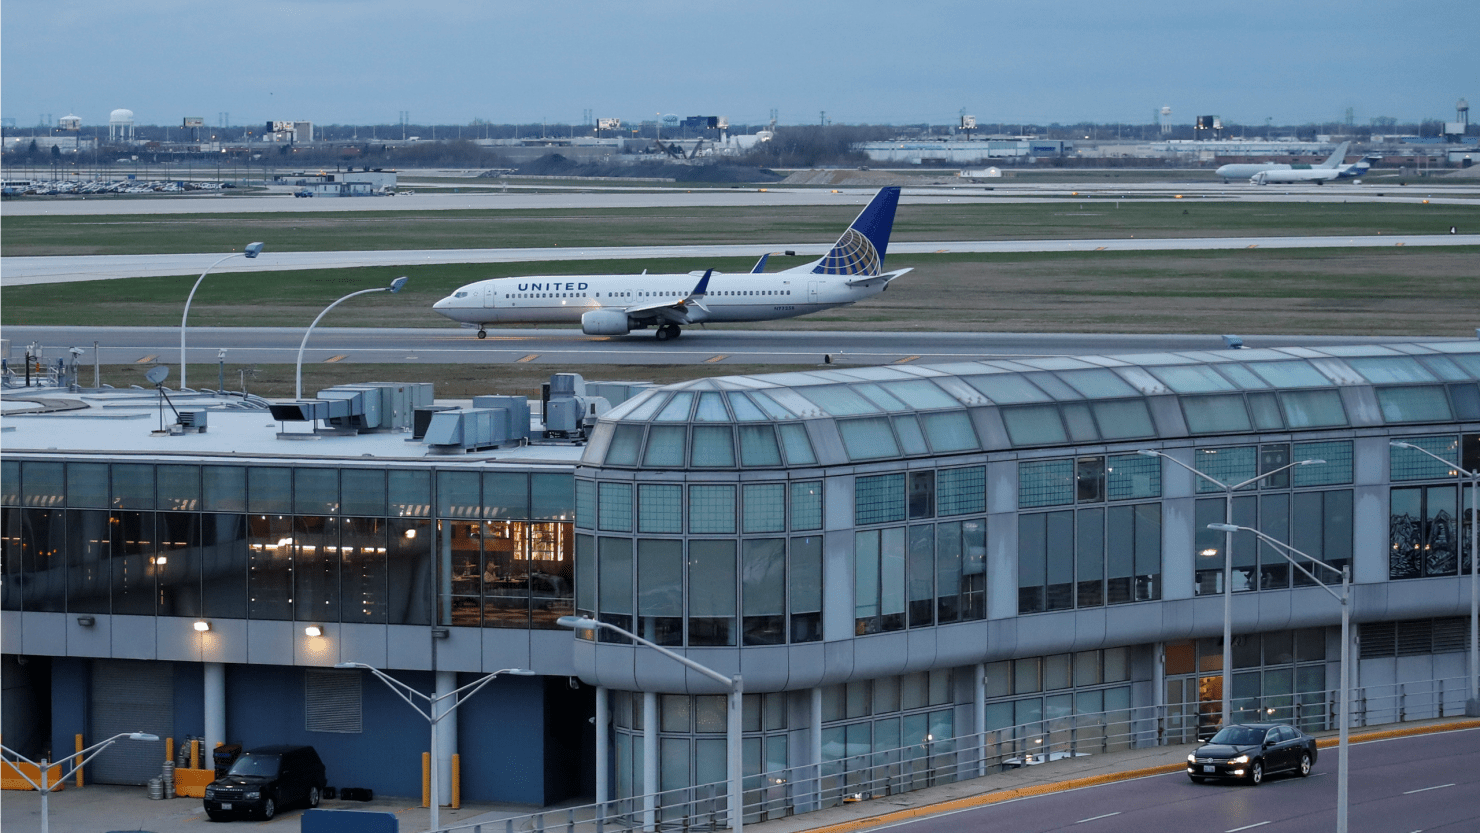 Protesters Plan to Shut Down Chicago’s O’Hare Airport on Labor Day